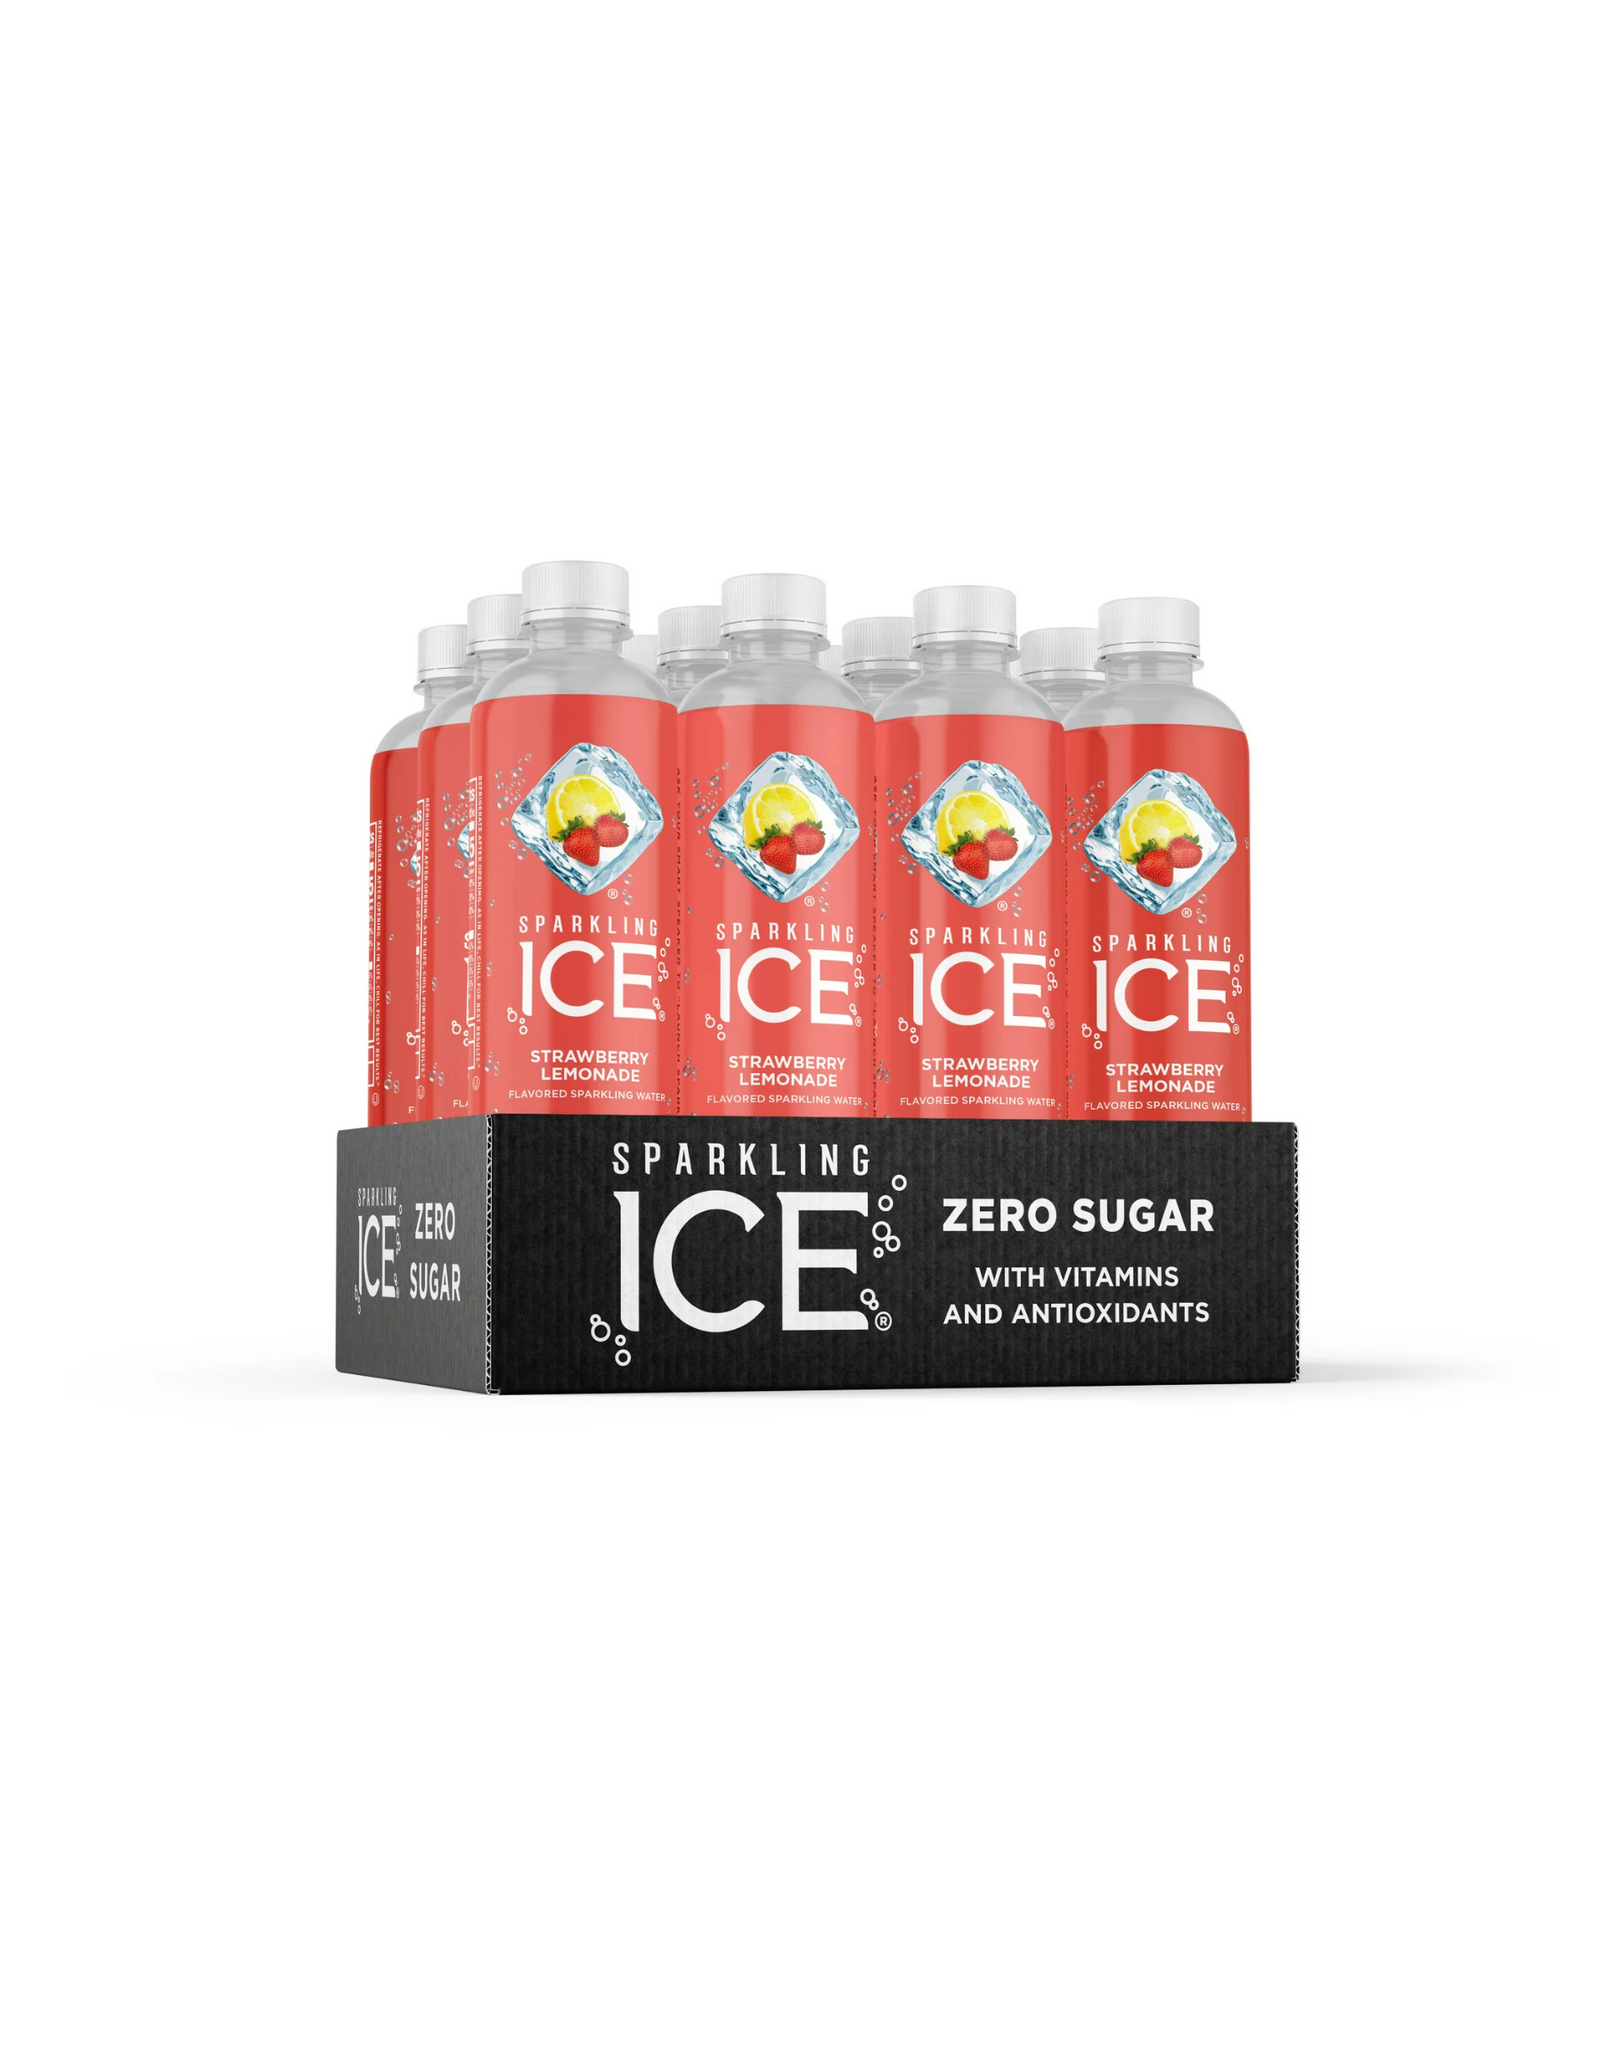 Sparkling Ice, Strawberry Lemonade Sparkling Water, with Vitamins and Antioxidants, 17 fl oz (Pack of 12)